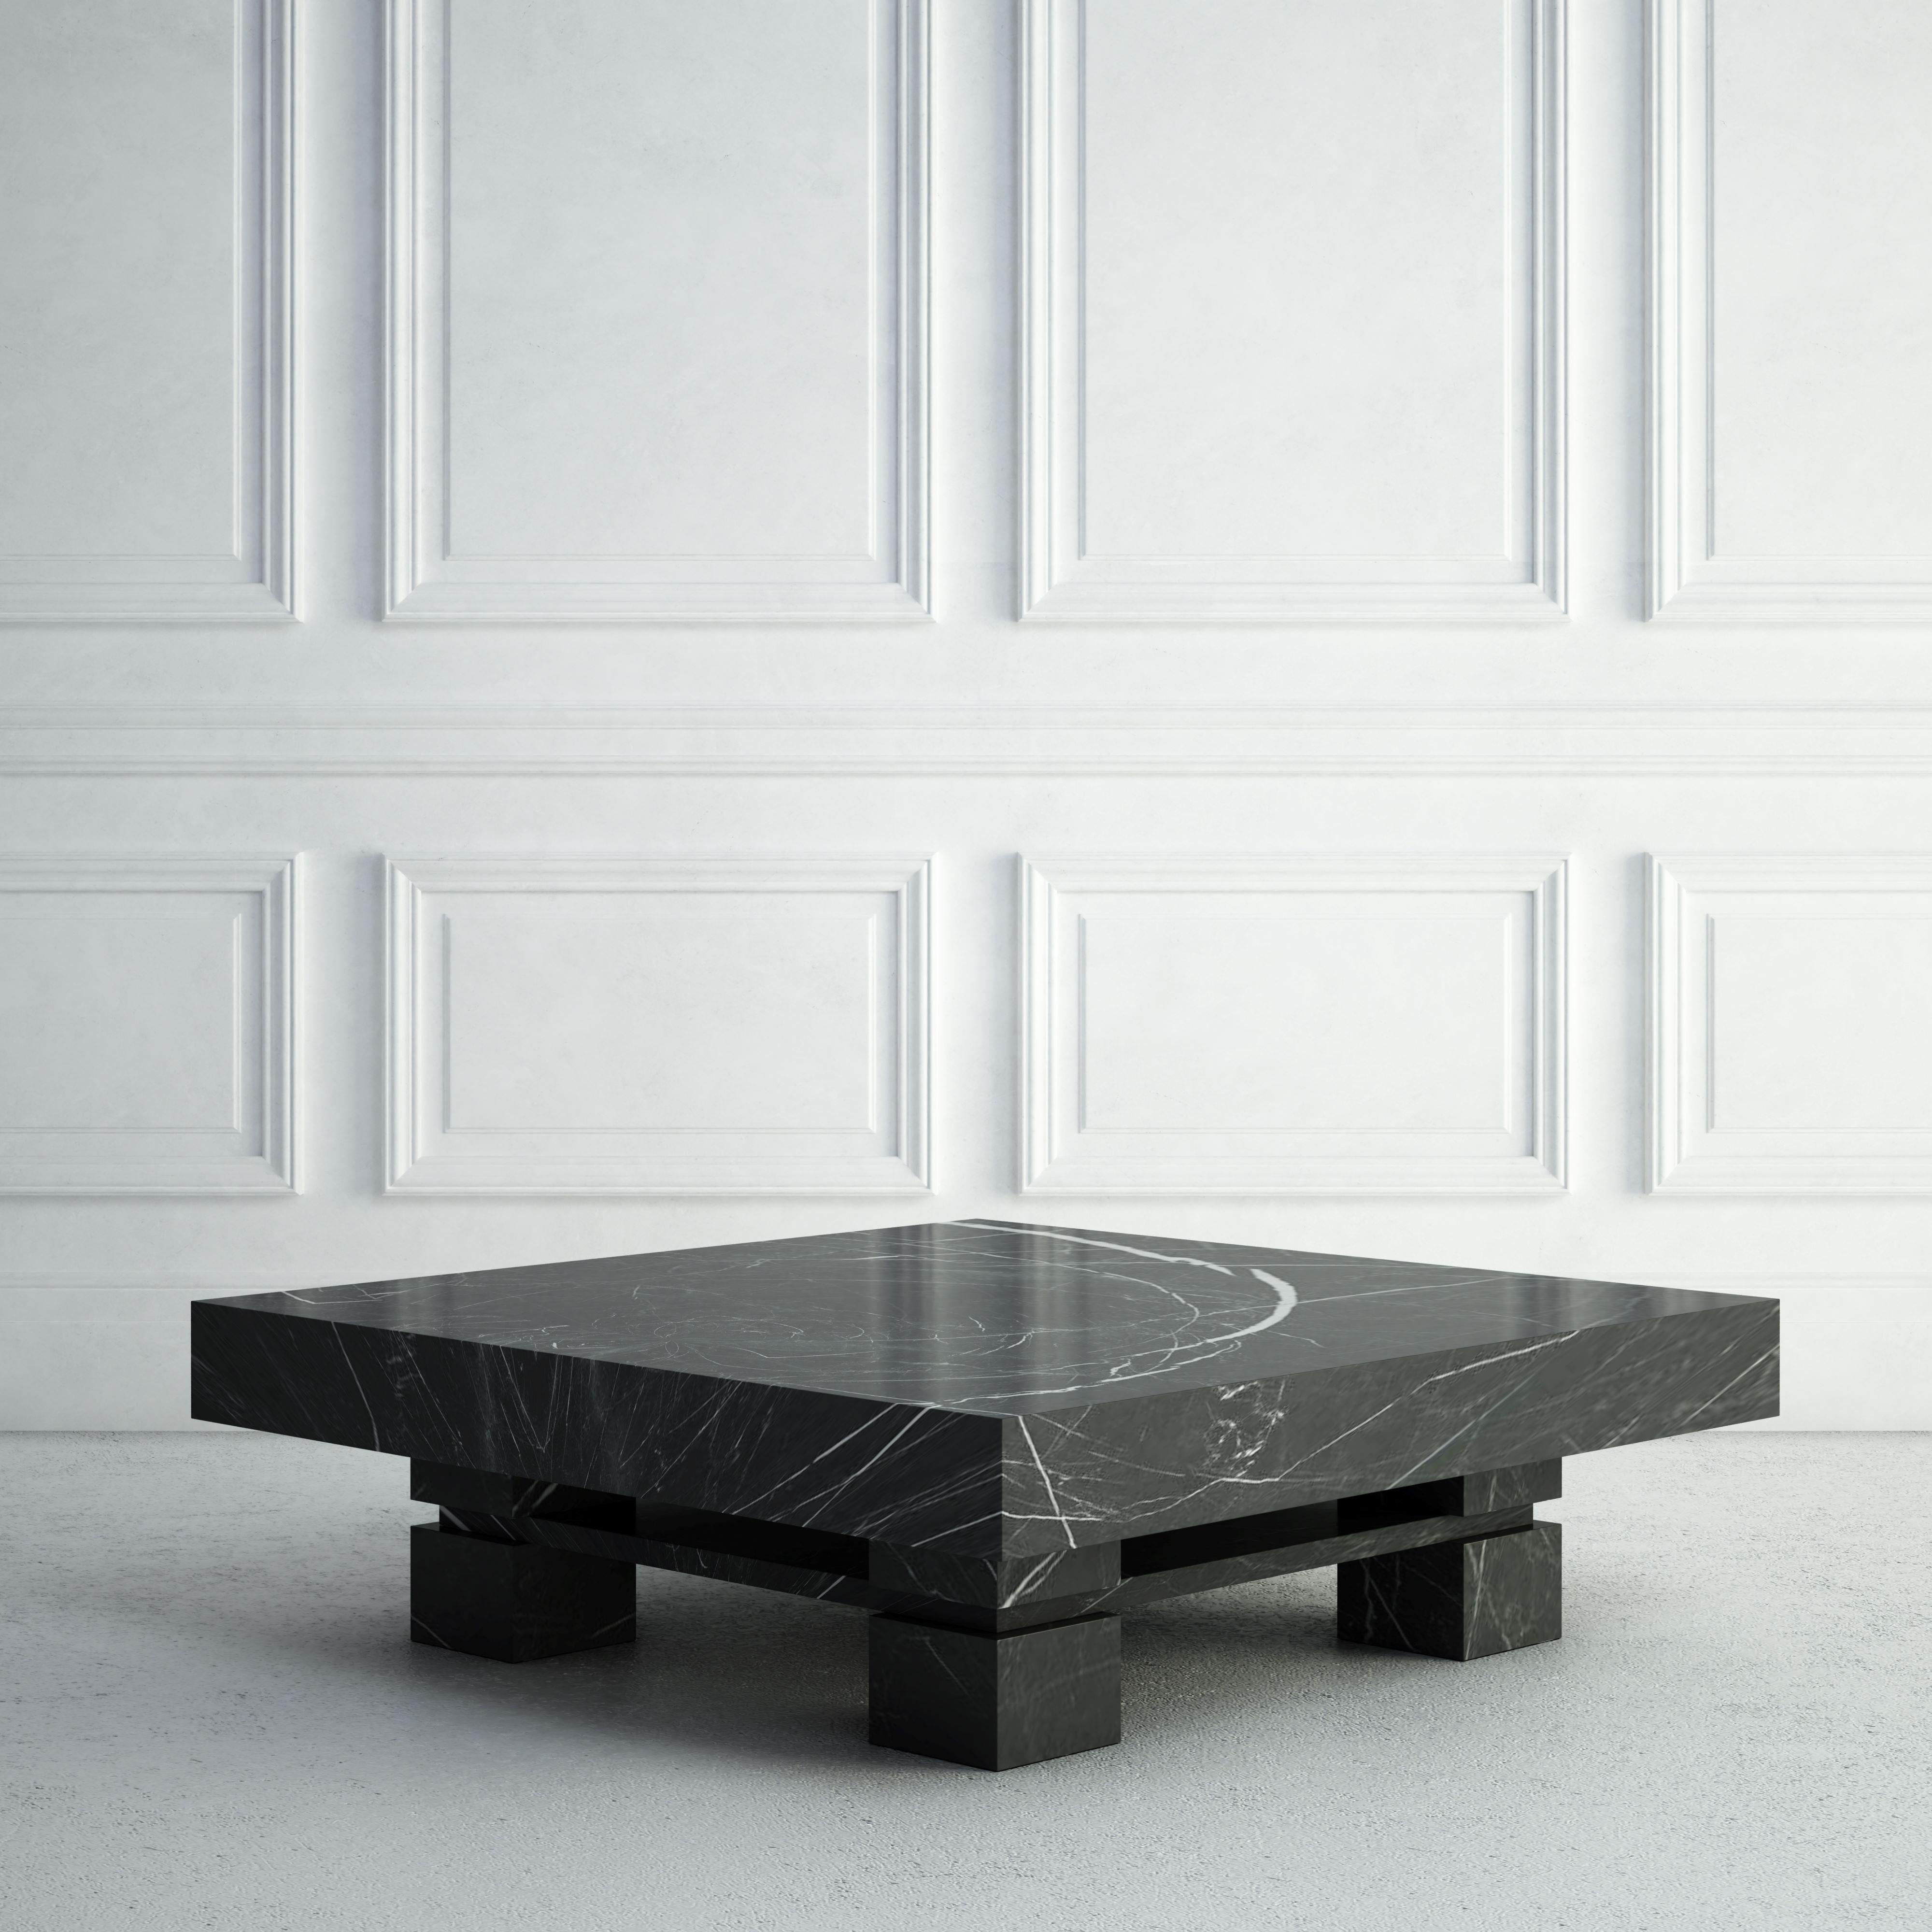 The Elodie is a bold stone coffee table that can anchor any seating area:  Its top is a thick square slab, and four chunky square bases are below, one in each corner.  A thinner square slab of the same stone breaks up each base, and runs below the